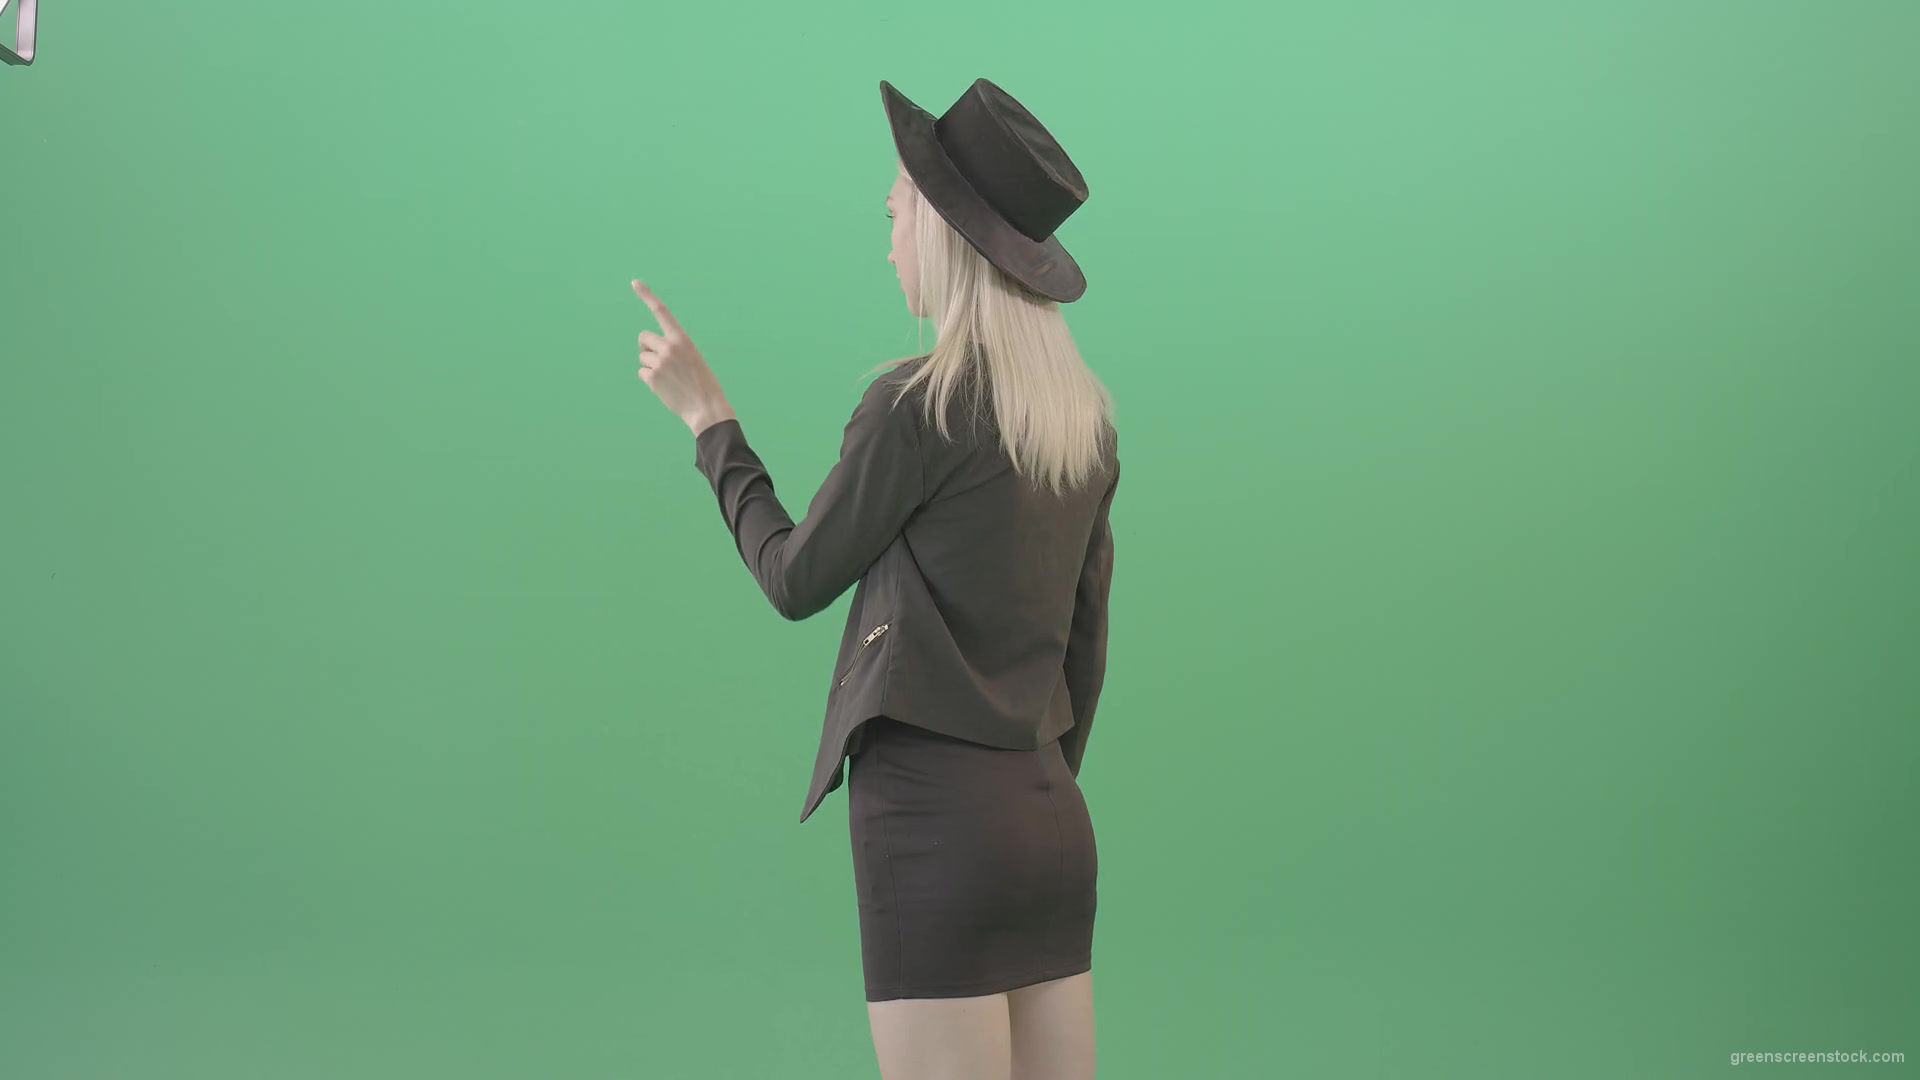 Back-view-black-costume-blonde-girl-looking-virtual-products-on-touch-screen-4K-Green-Screen-Video-Footage-1920_007 Green Screen Stock